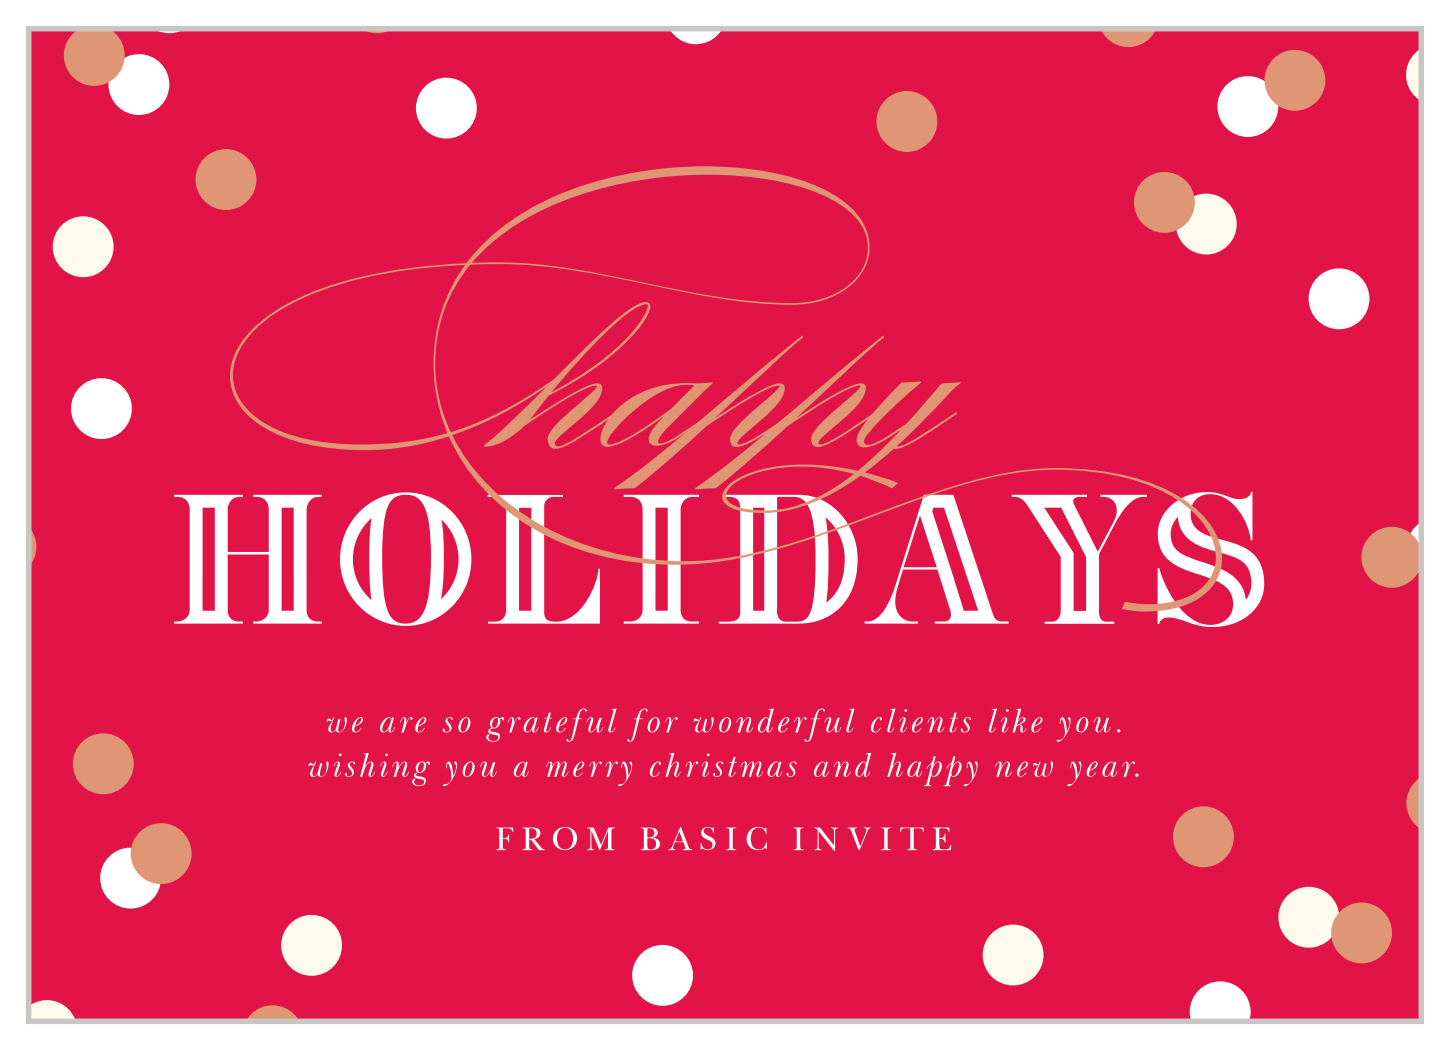 Foil Confetti Corporate Holiday Cards